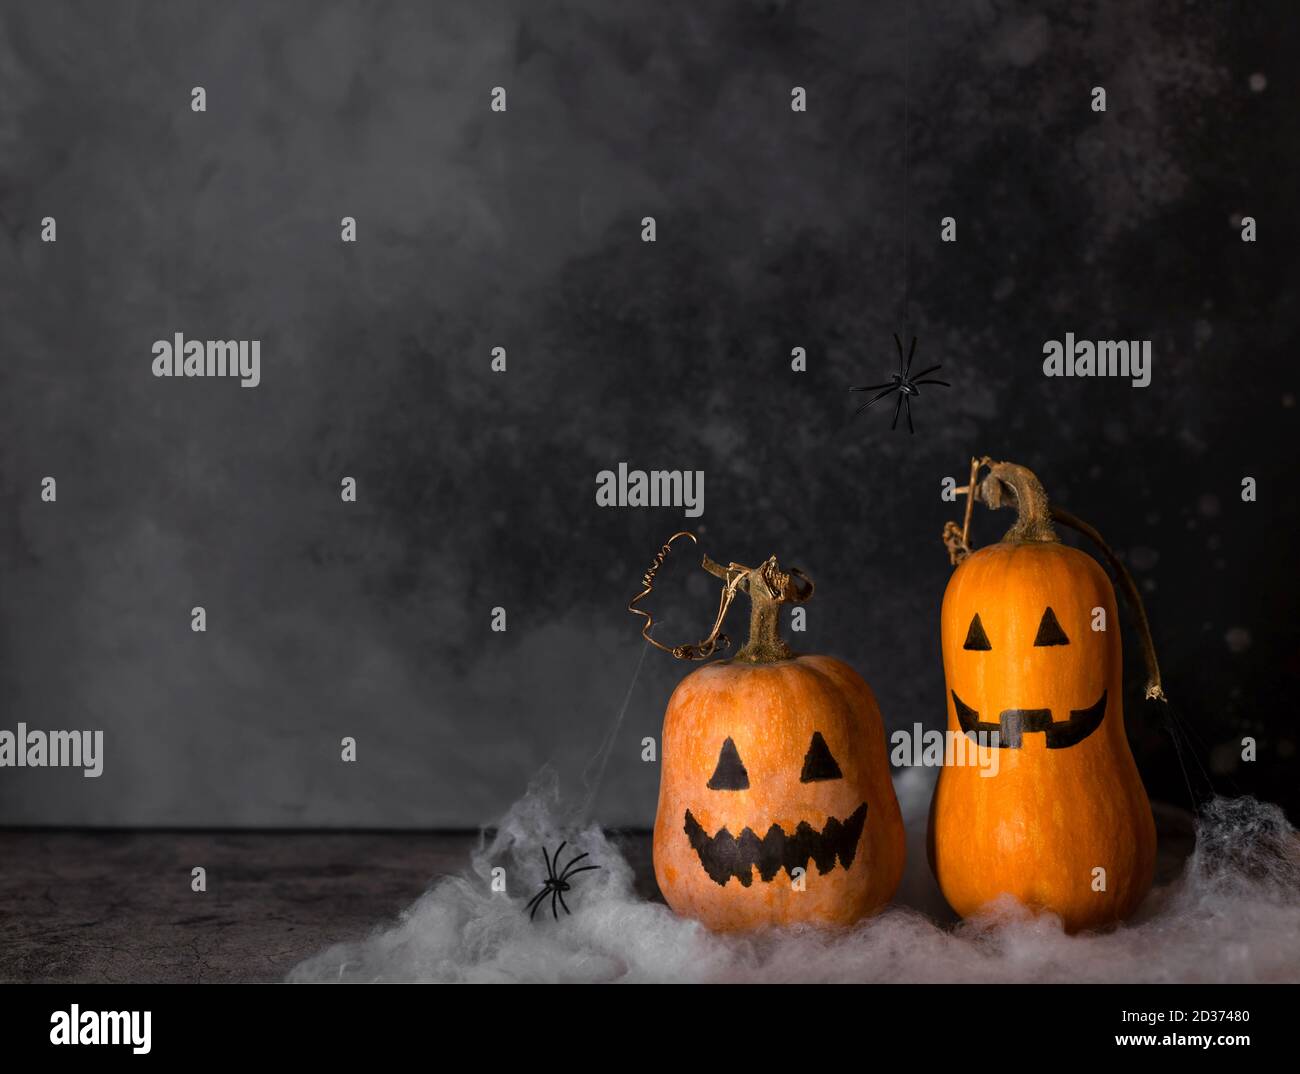 Halloween pumpkins with painted faces and spider web with hanging spiders Stock Photo